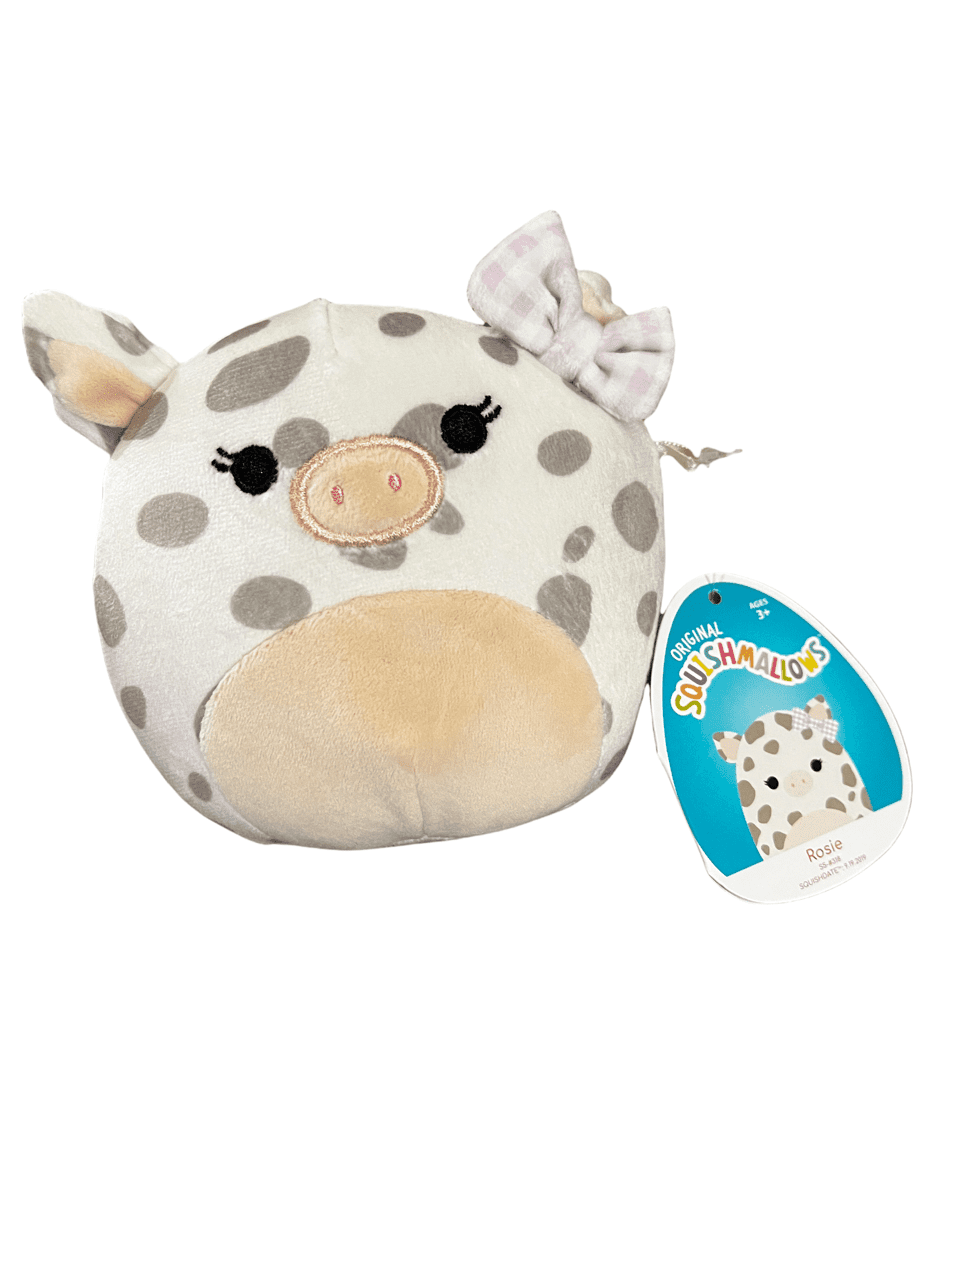 *SALE*Kellytoy Squishmallow 8" Rosie the Spotted Pig NEW Spring Plush Toy Animal 